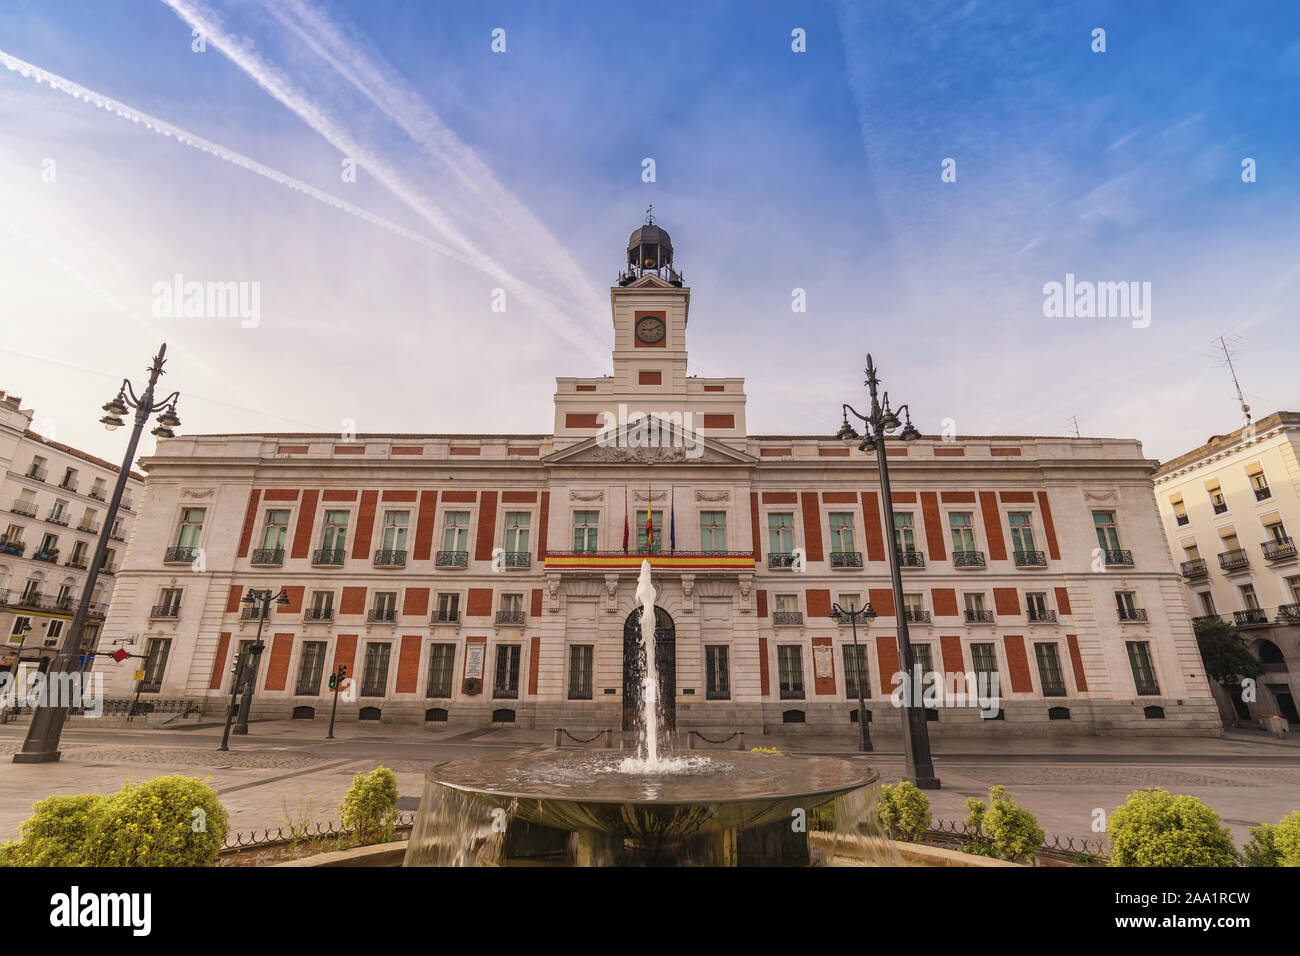 Madrid Spain, city skyline at Puerta del Sol and Clock Tower of Sun Gate Stock Photo